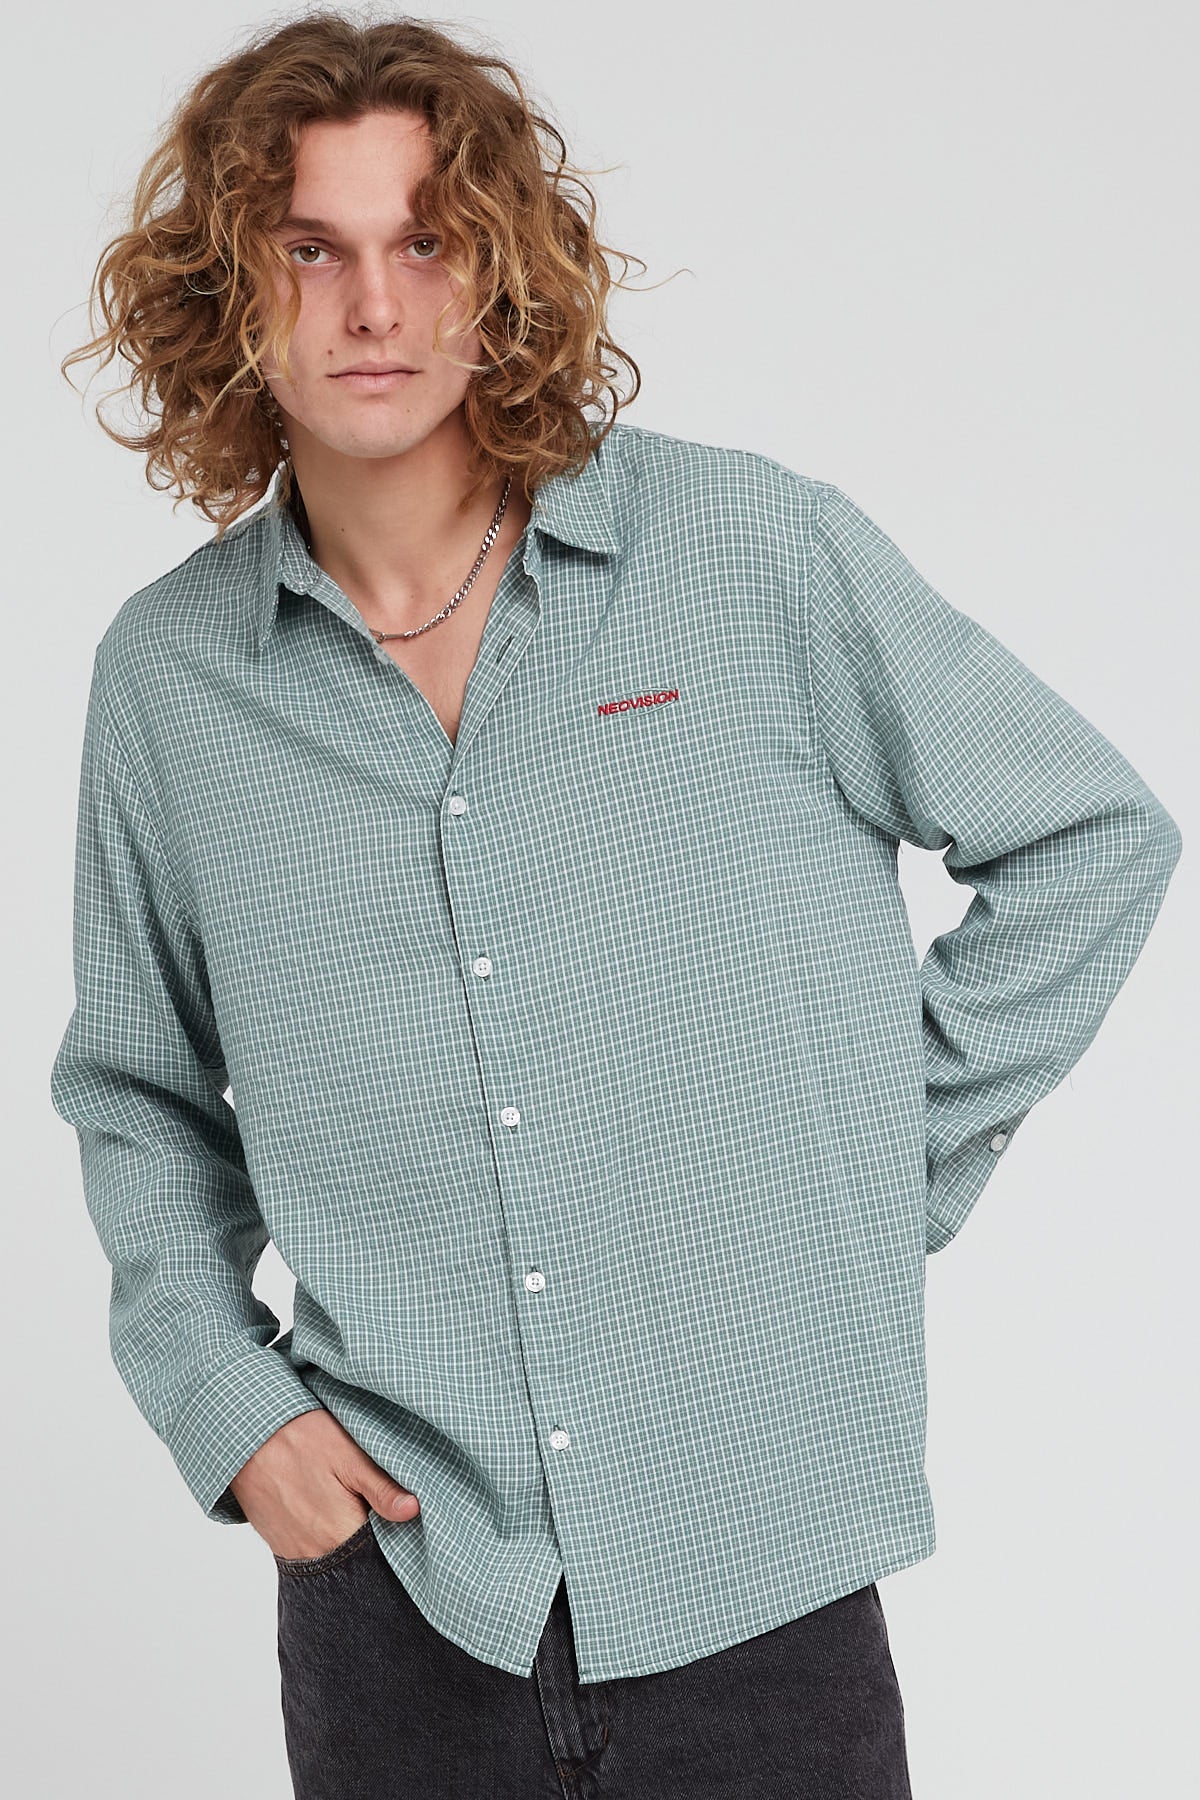 Neovision Eclipse Long Sleeve Shirt Teal Check